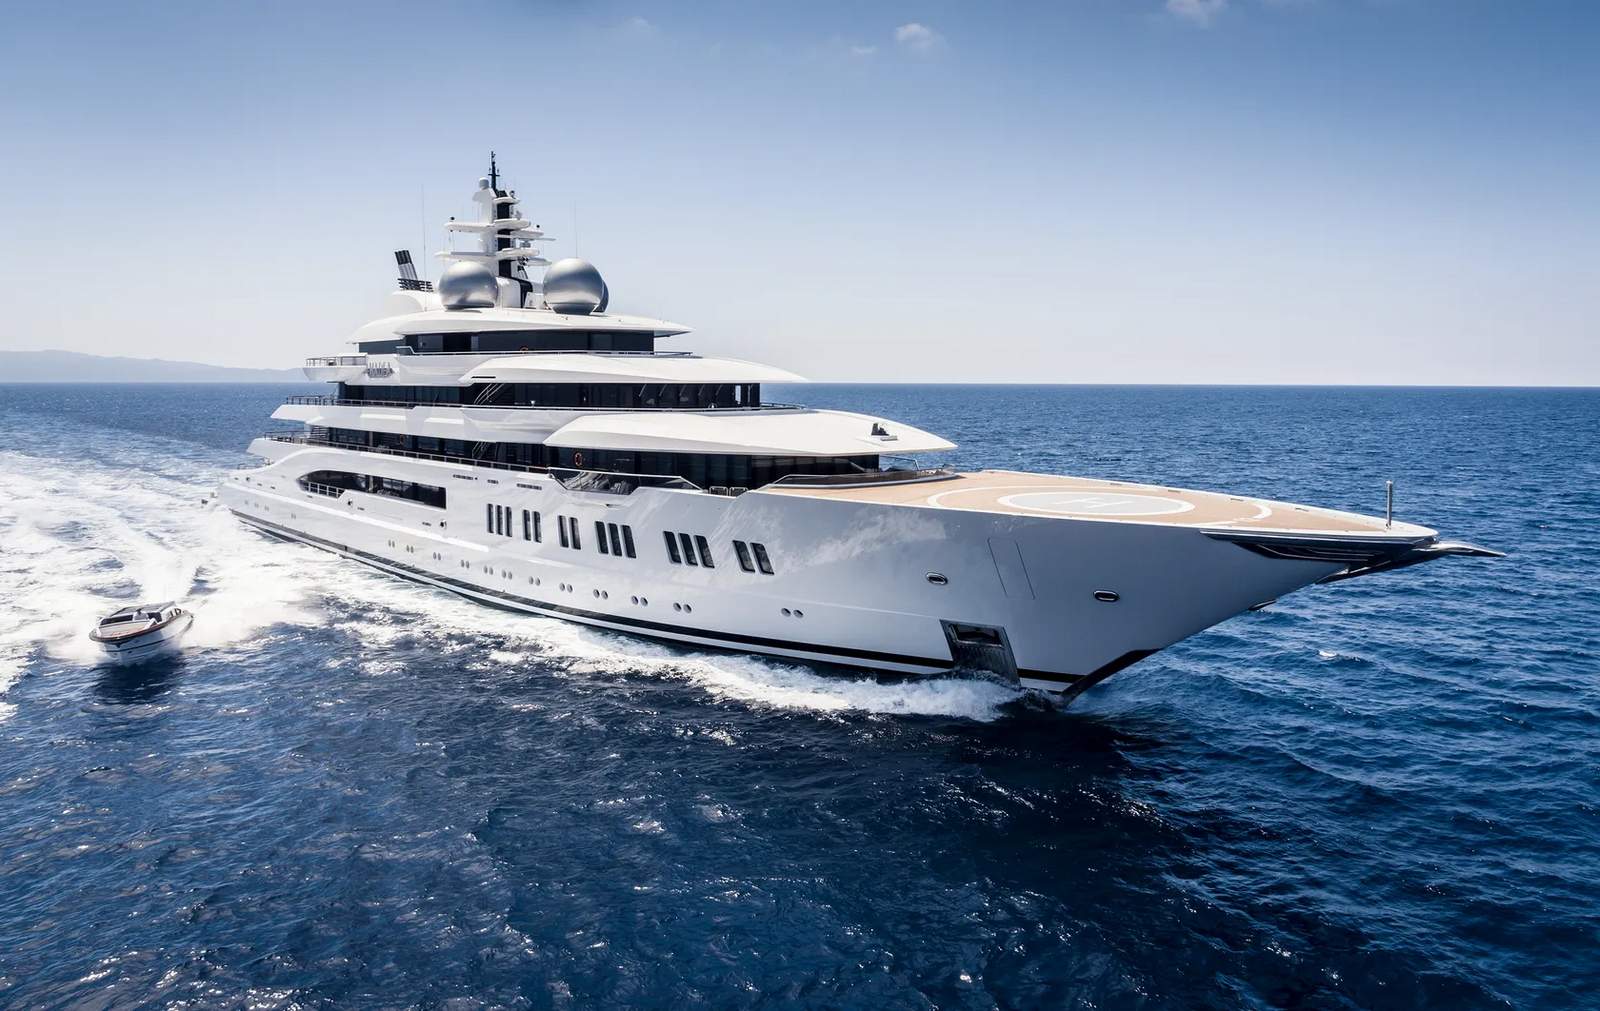 To avoid getting captured, a $250 million yacht of one of Russia’s wealthiest oligarchs is sailing at full speed towards Australia. The vessel ‘Amadea’ is longer than a football field, it has a dedicated party deck with 20,000 watts of speakers and a cinema with a popcorn machine.